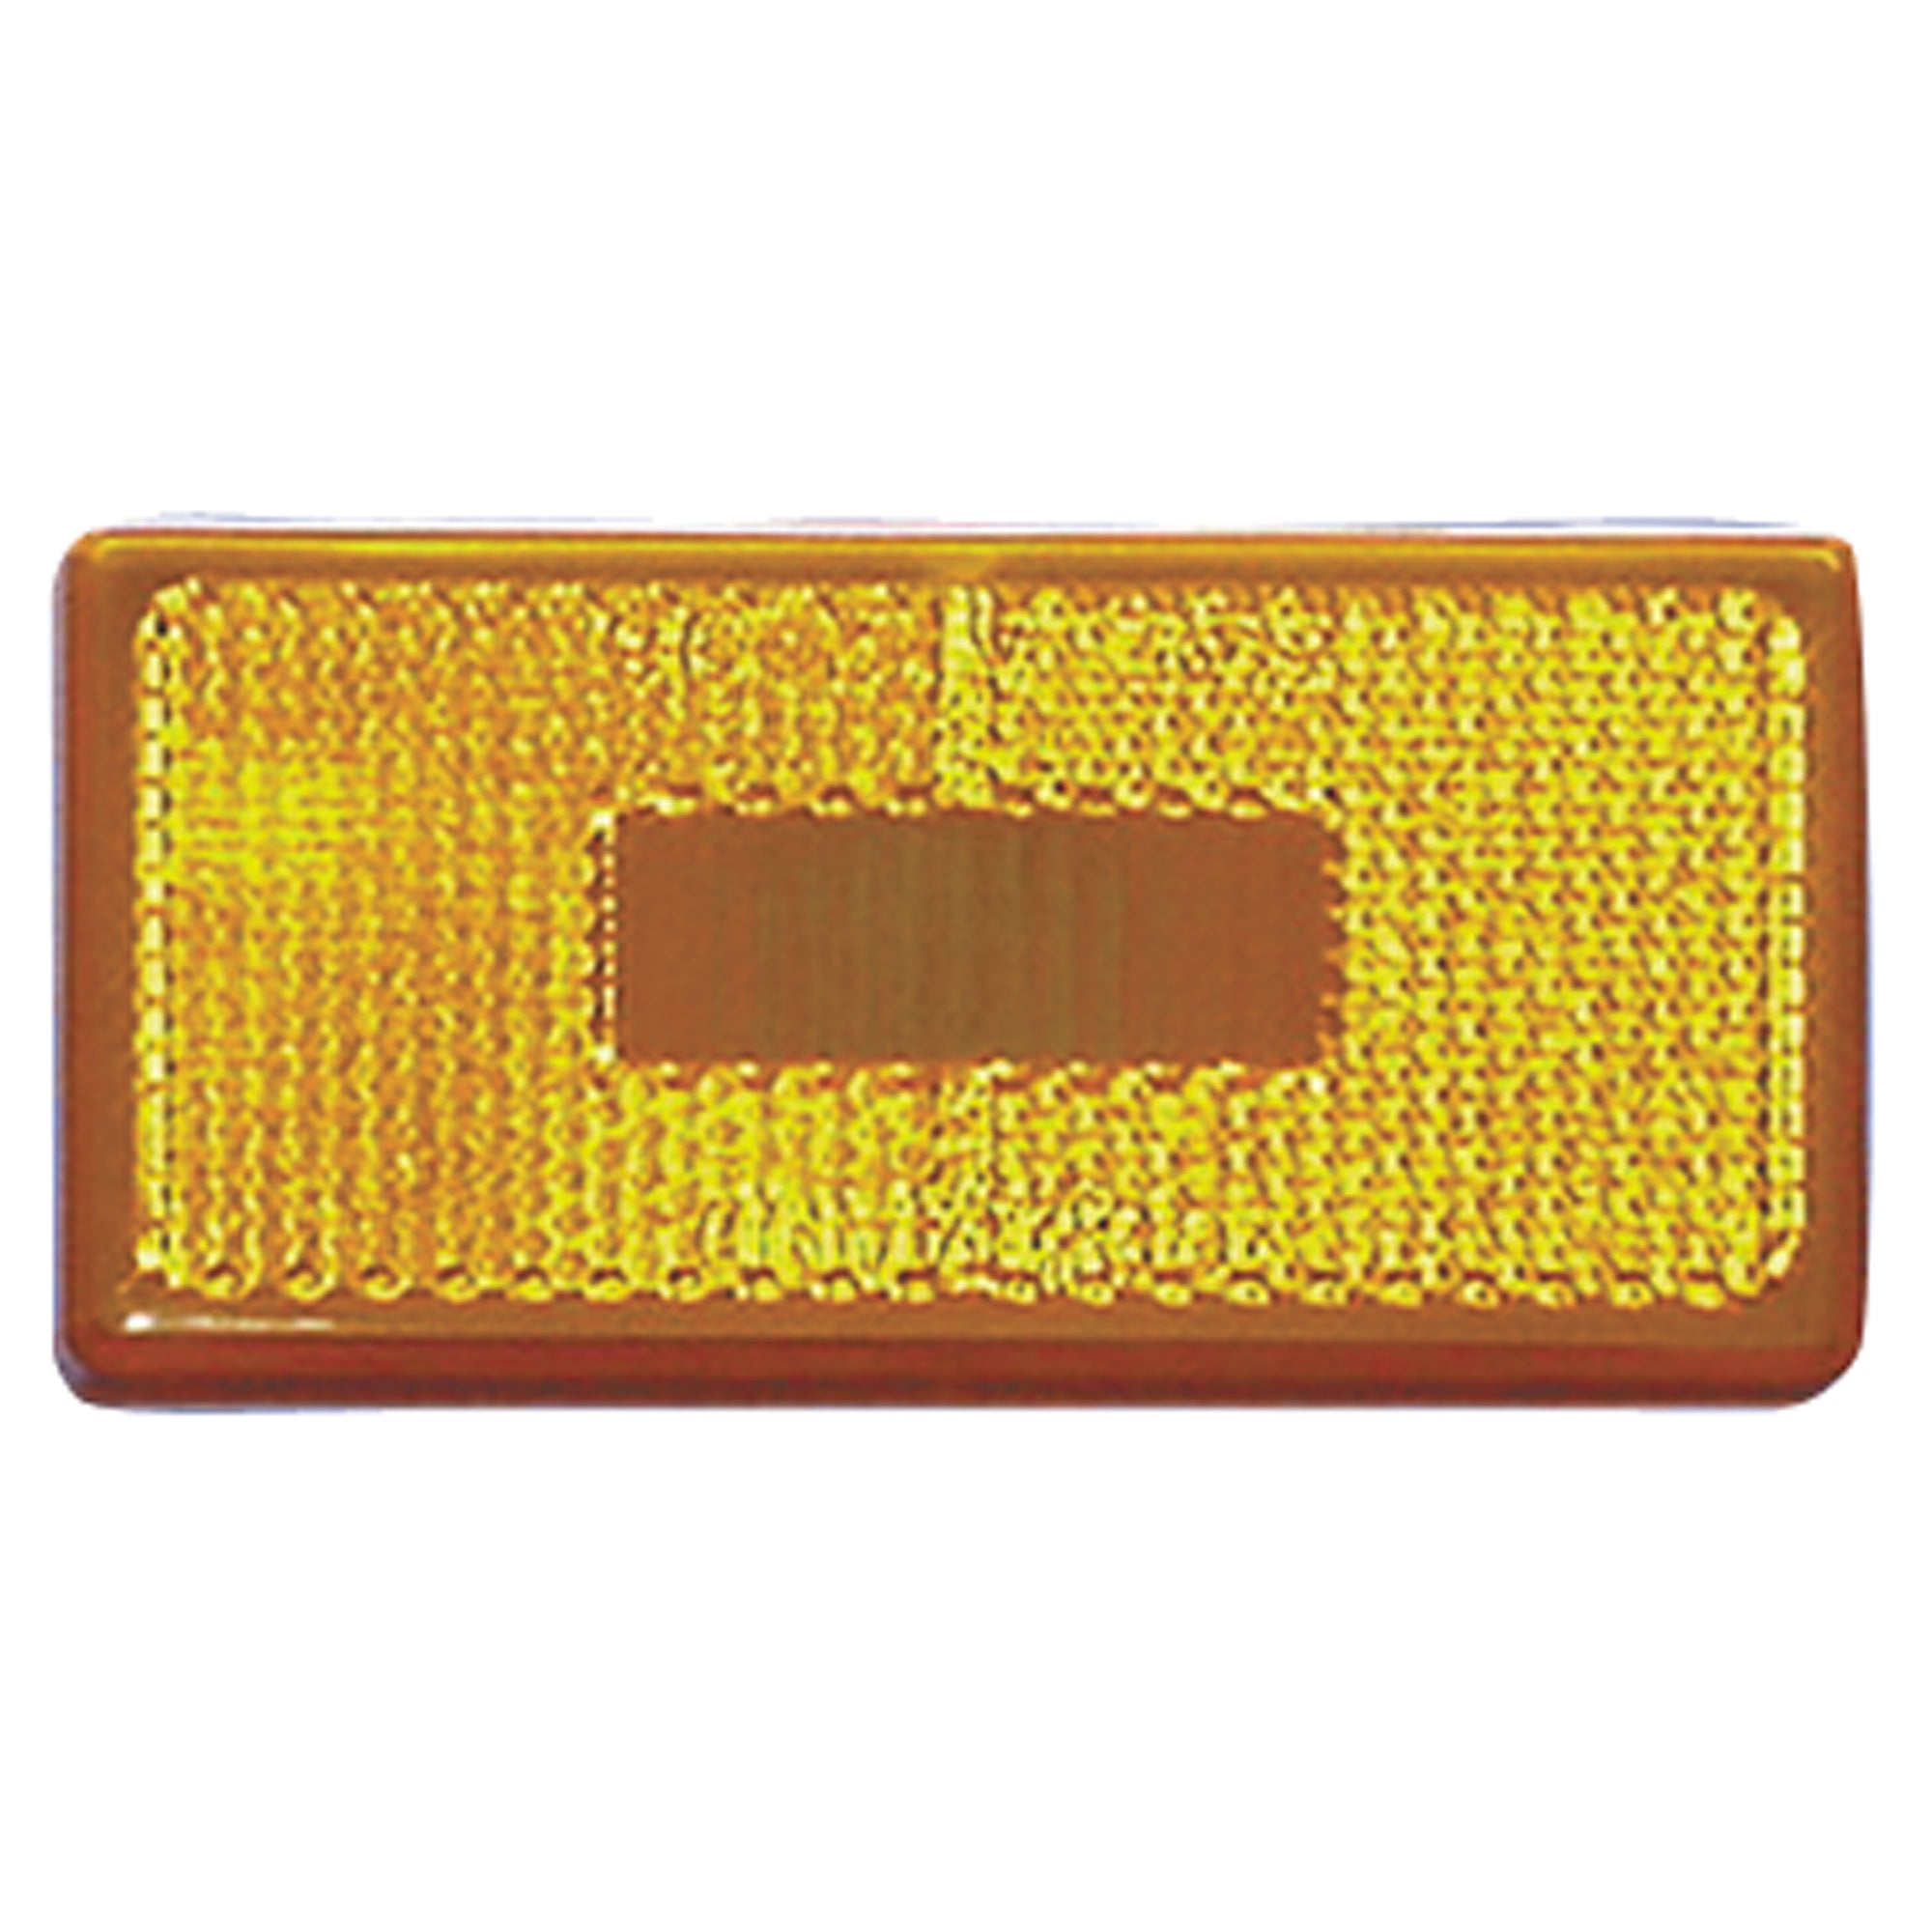 Fasteners Unlimited 89-181A Command Electronics Clearance Light - Amber Lens